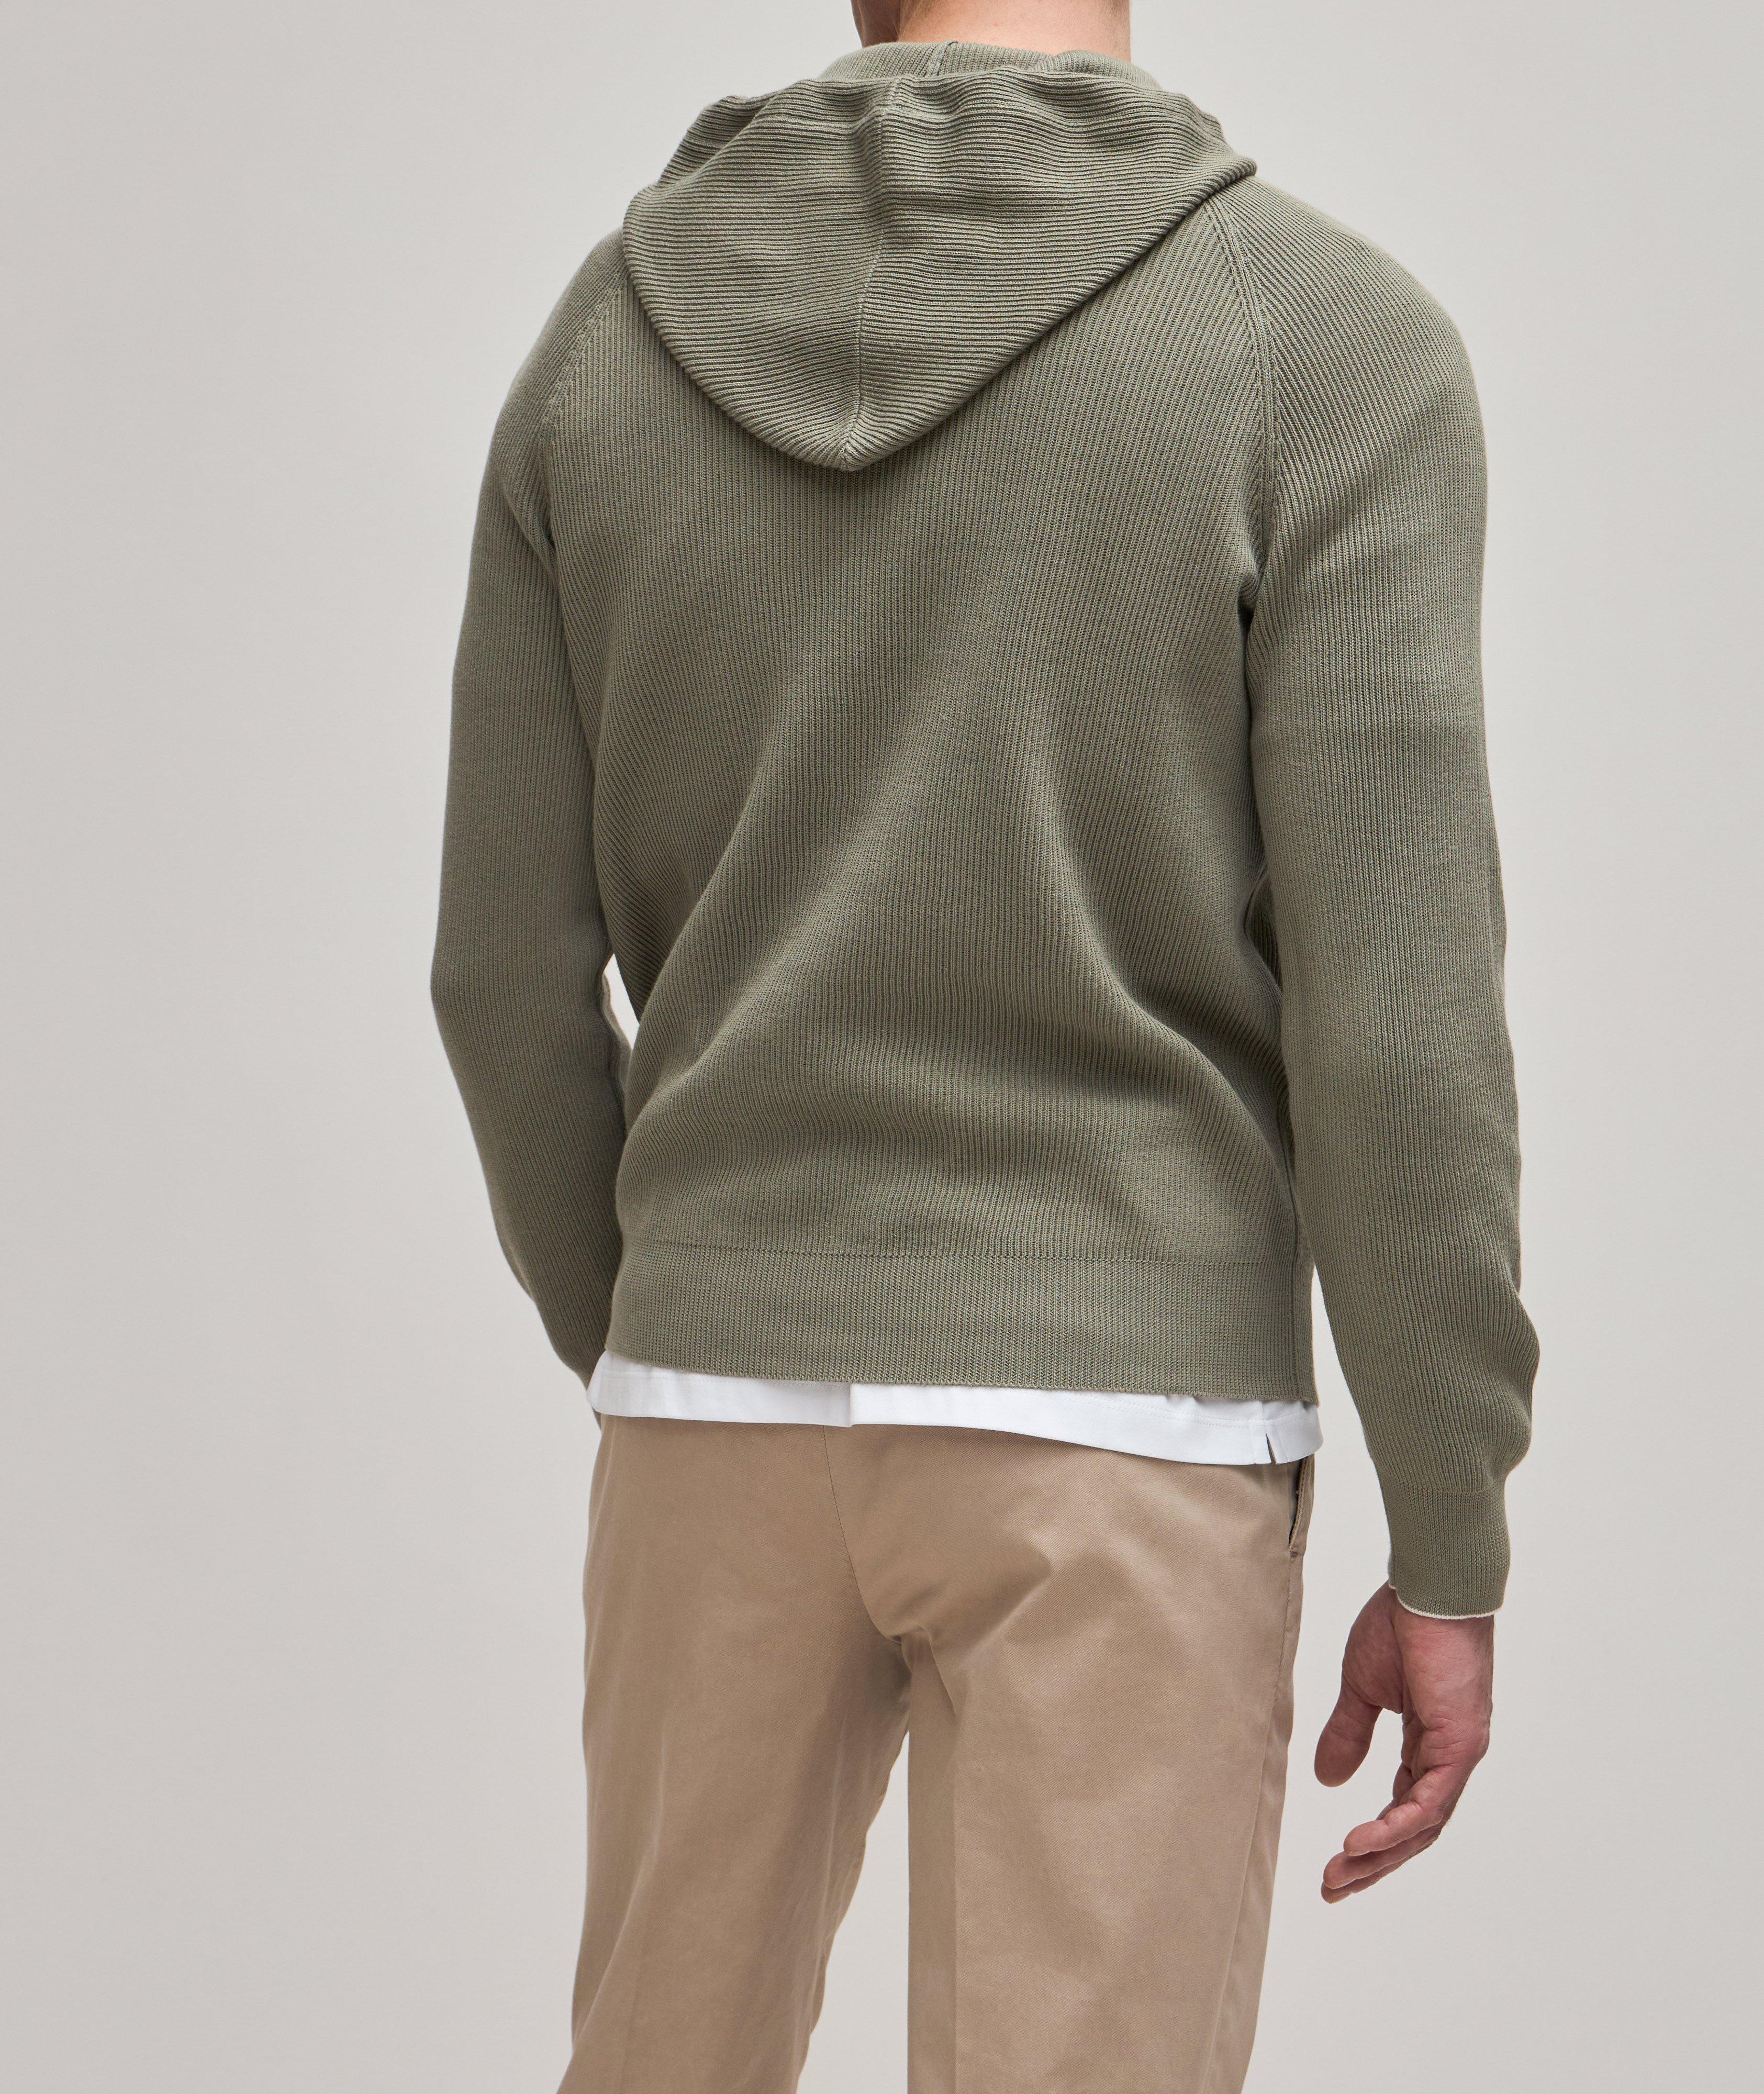 Cotton Rib Knit Hooded Pullover image 3